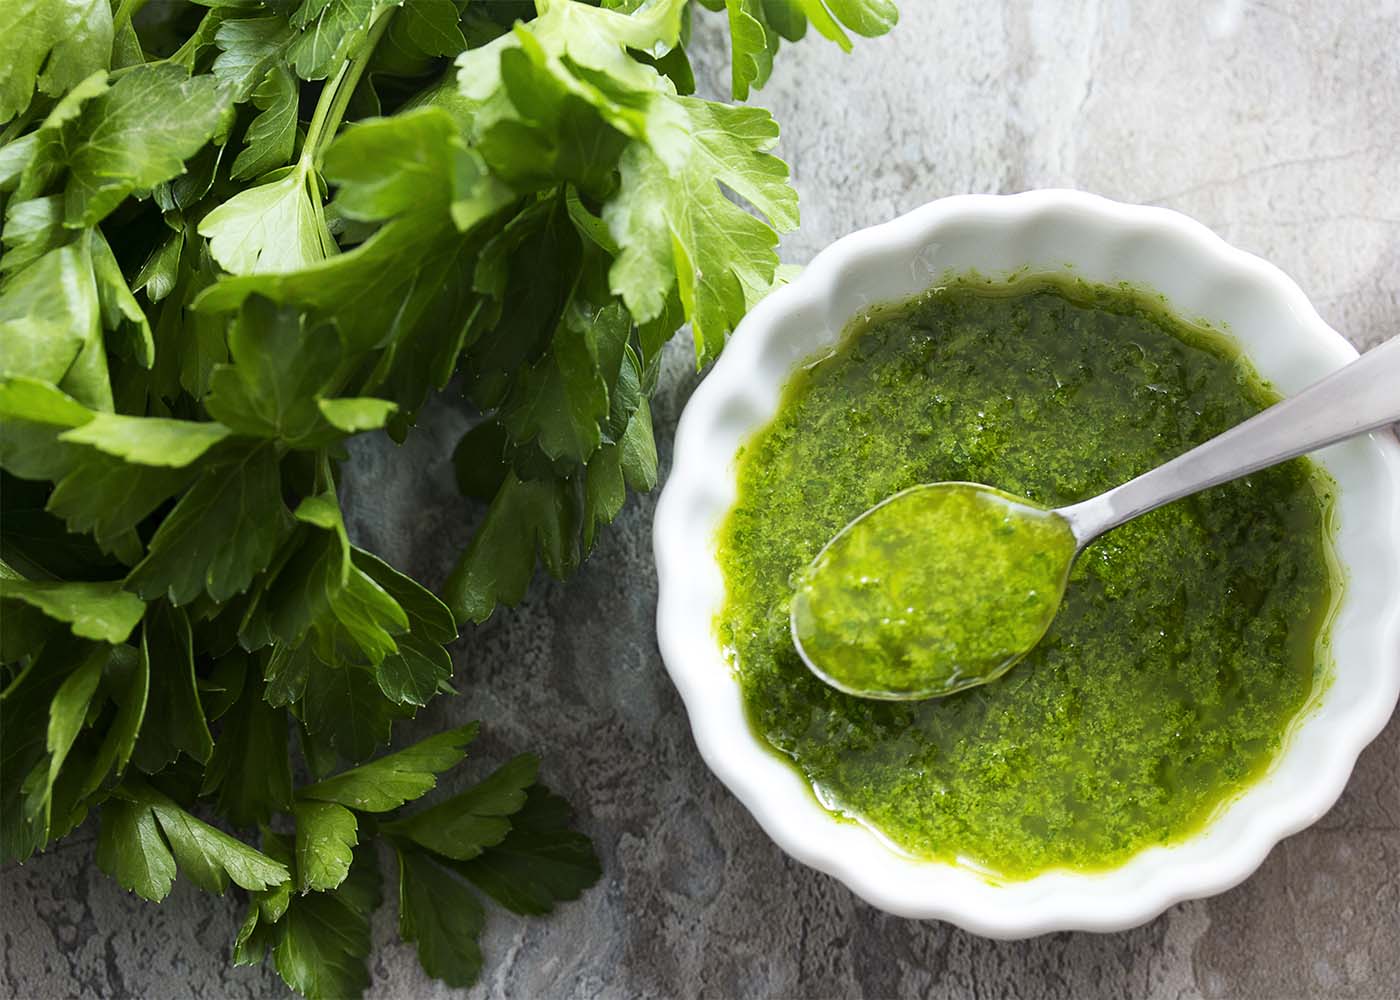 This parsley infused olive oil is a quick condiment which is wonderful drizzled over soups, bruschetta, grilled foods, and more! | justalittlebitofbacon.com